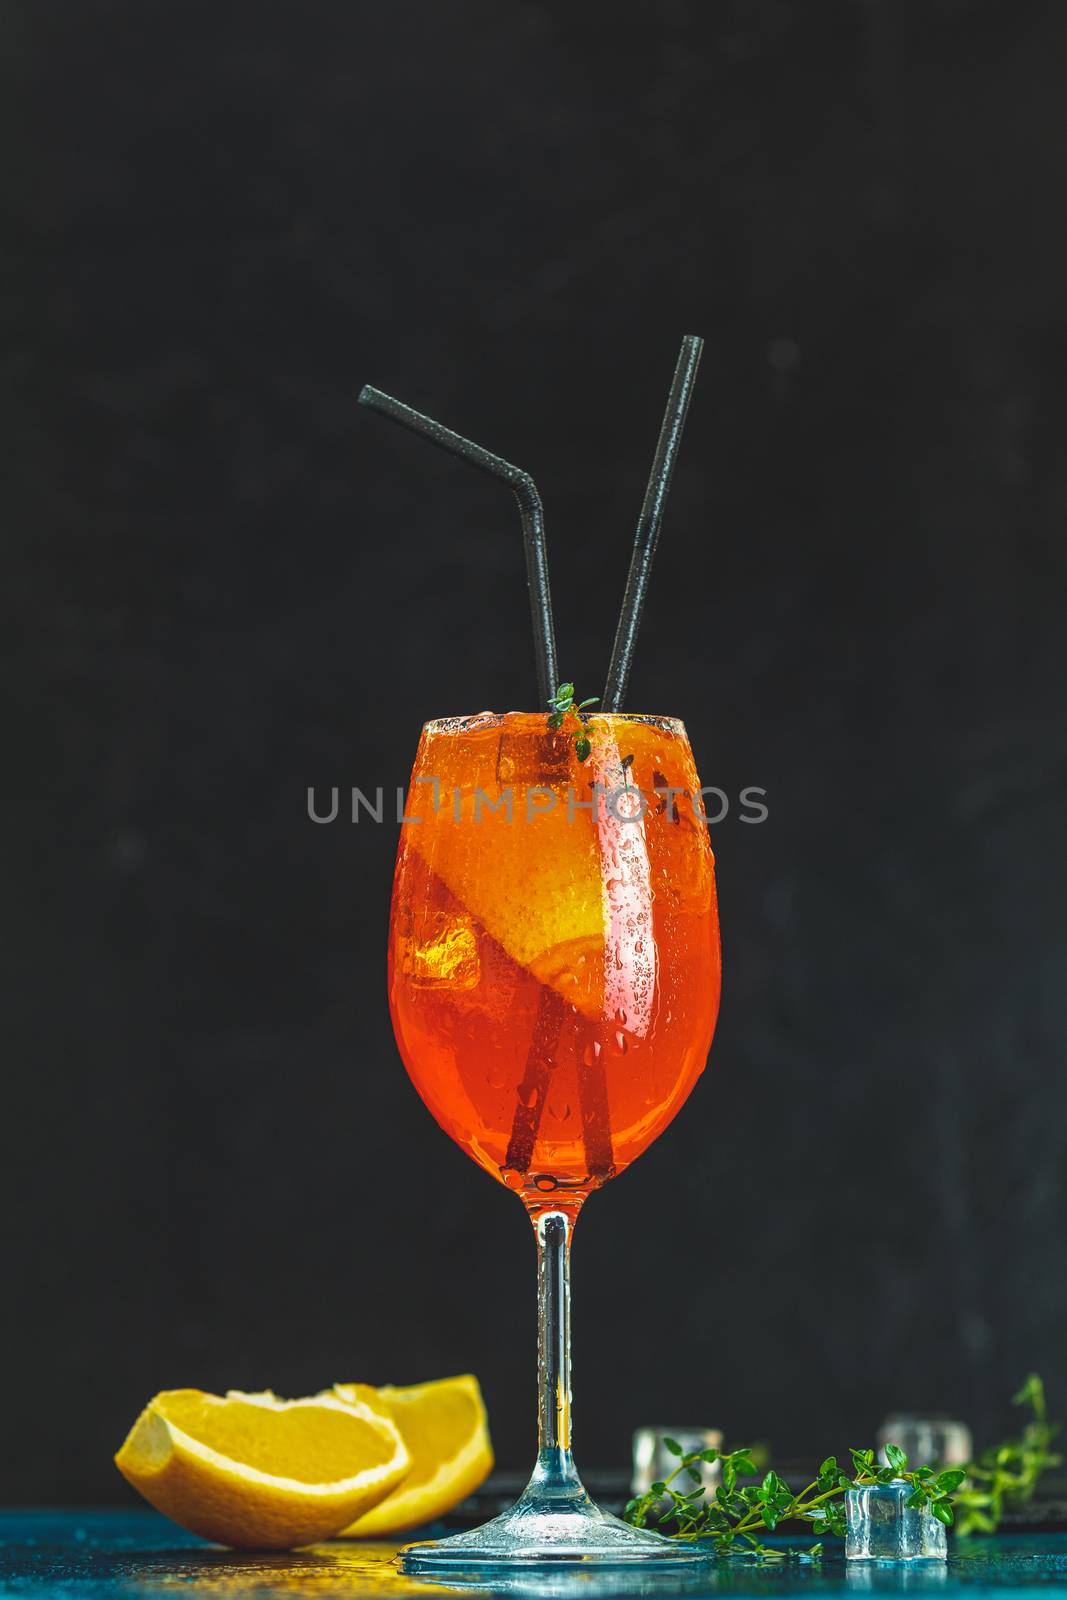 Cocktail aperol spritz in big wine glass with water drops on dark background. Summer alcohol cocktail with orange slices. Italian cocktail aperol spritz on slate board